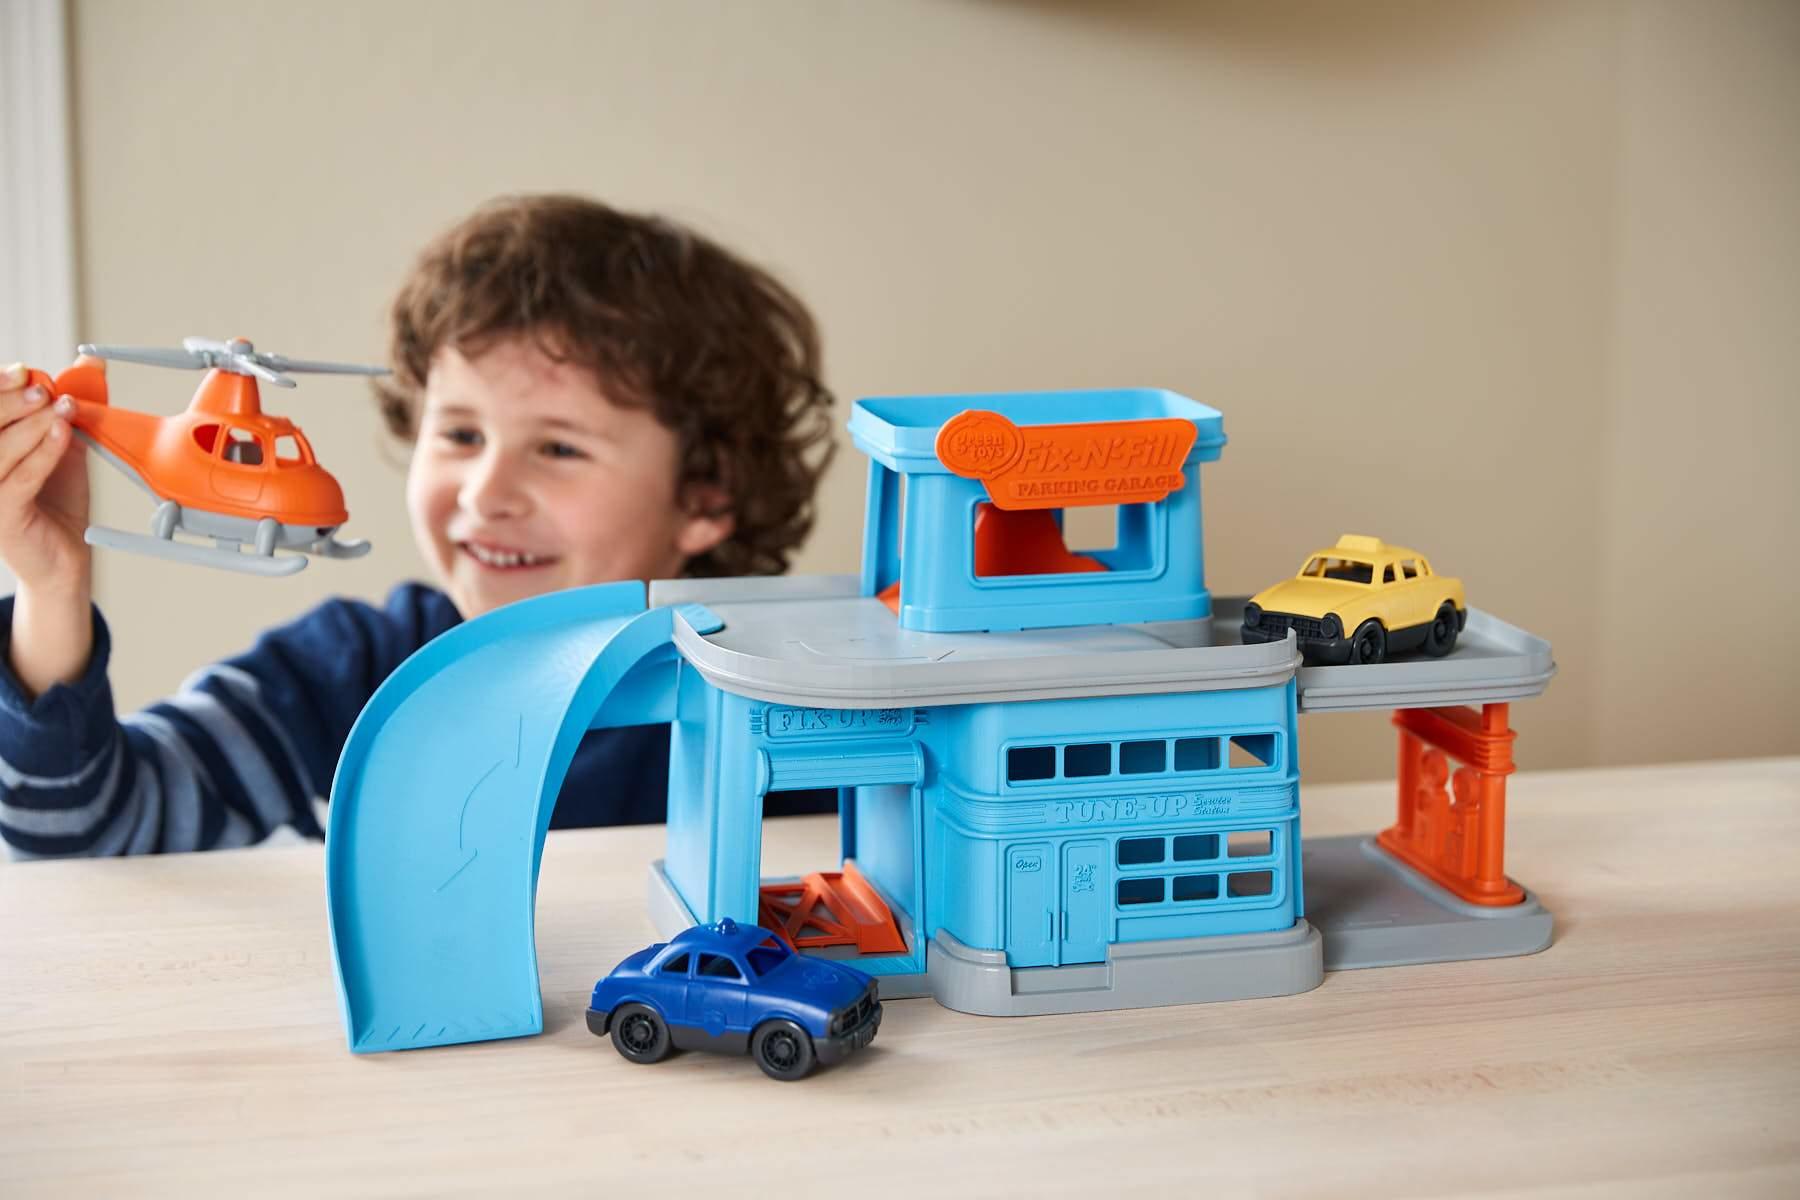 Toy parking garage from Green Toys in manufacturer's packaging.